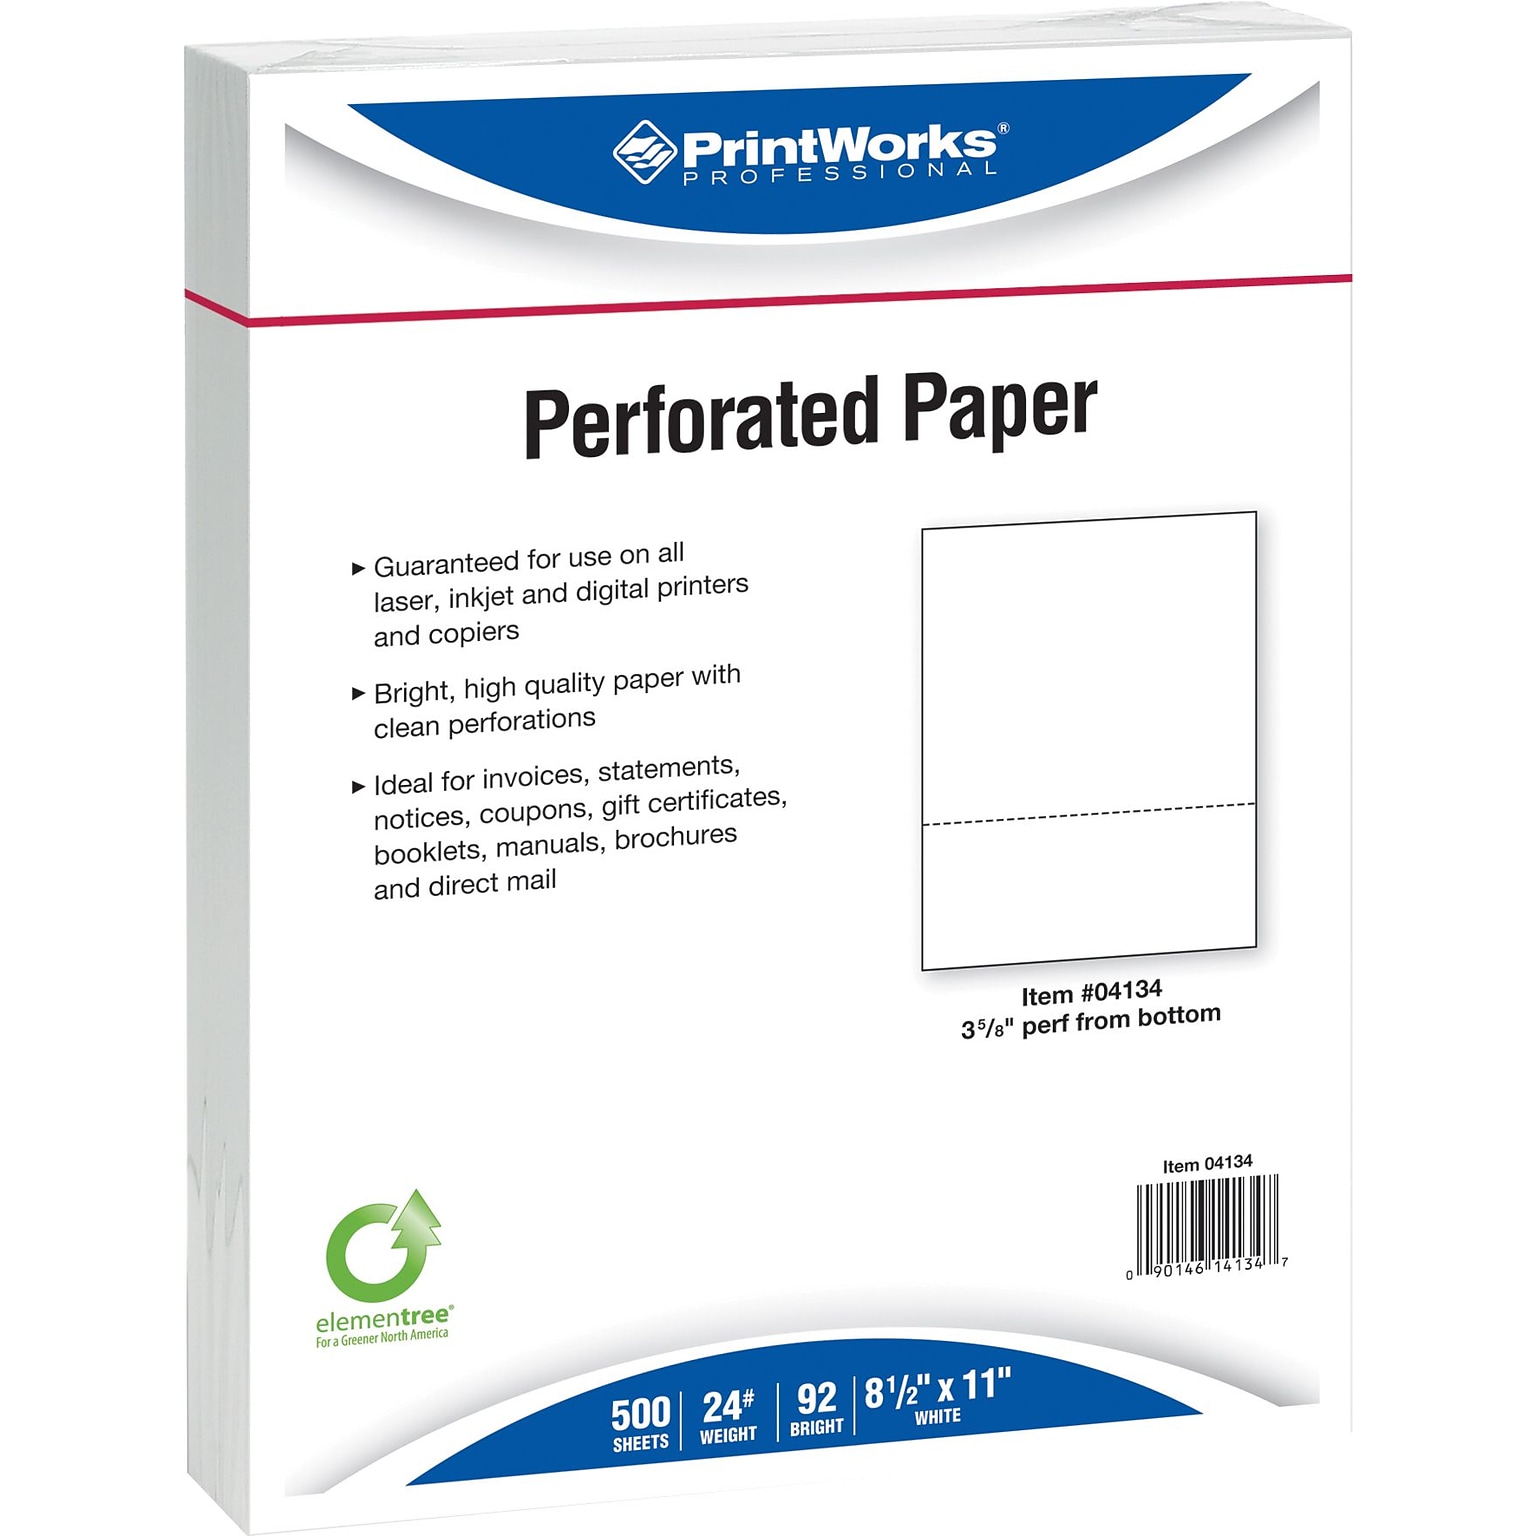 Printworks® Professional 8.5 x 11 Perforated Paper, 24 lbs., 92 Brightness, 2500 Sheets/Carton (04134)